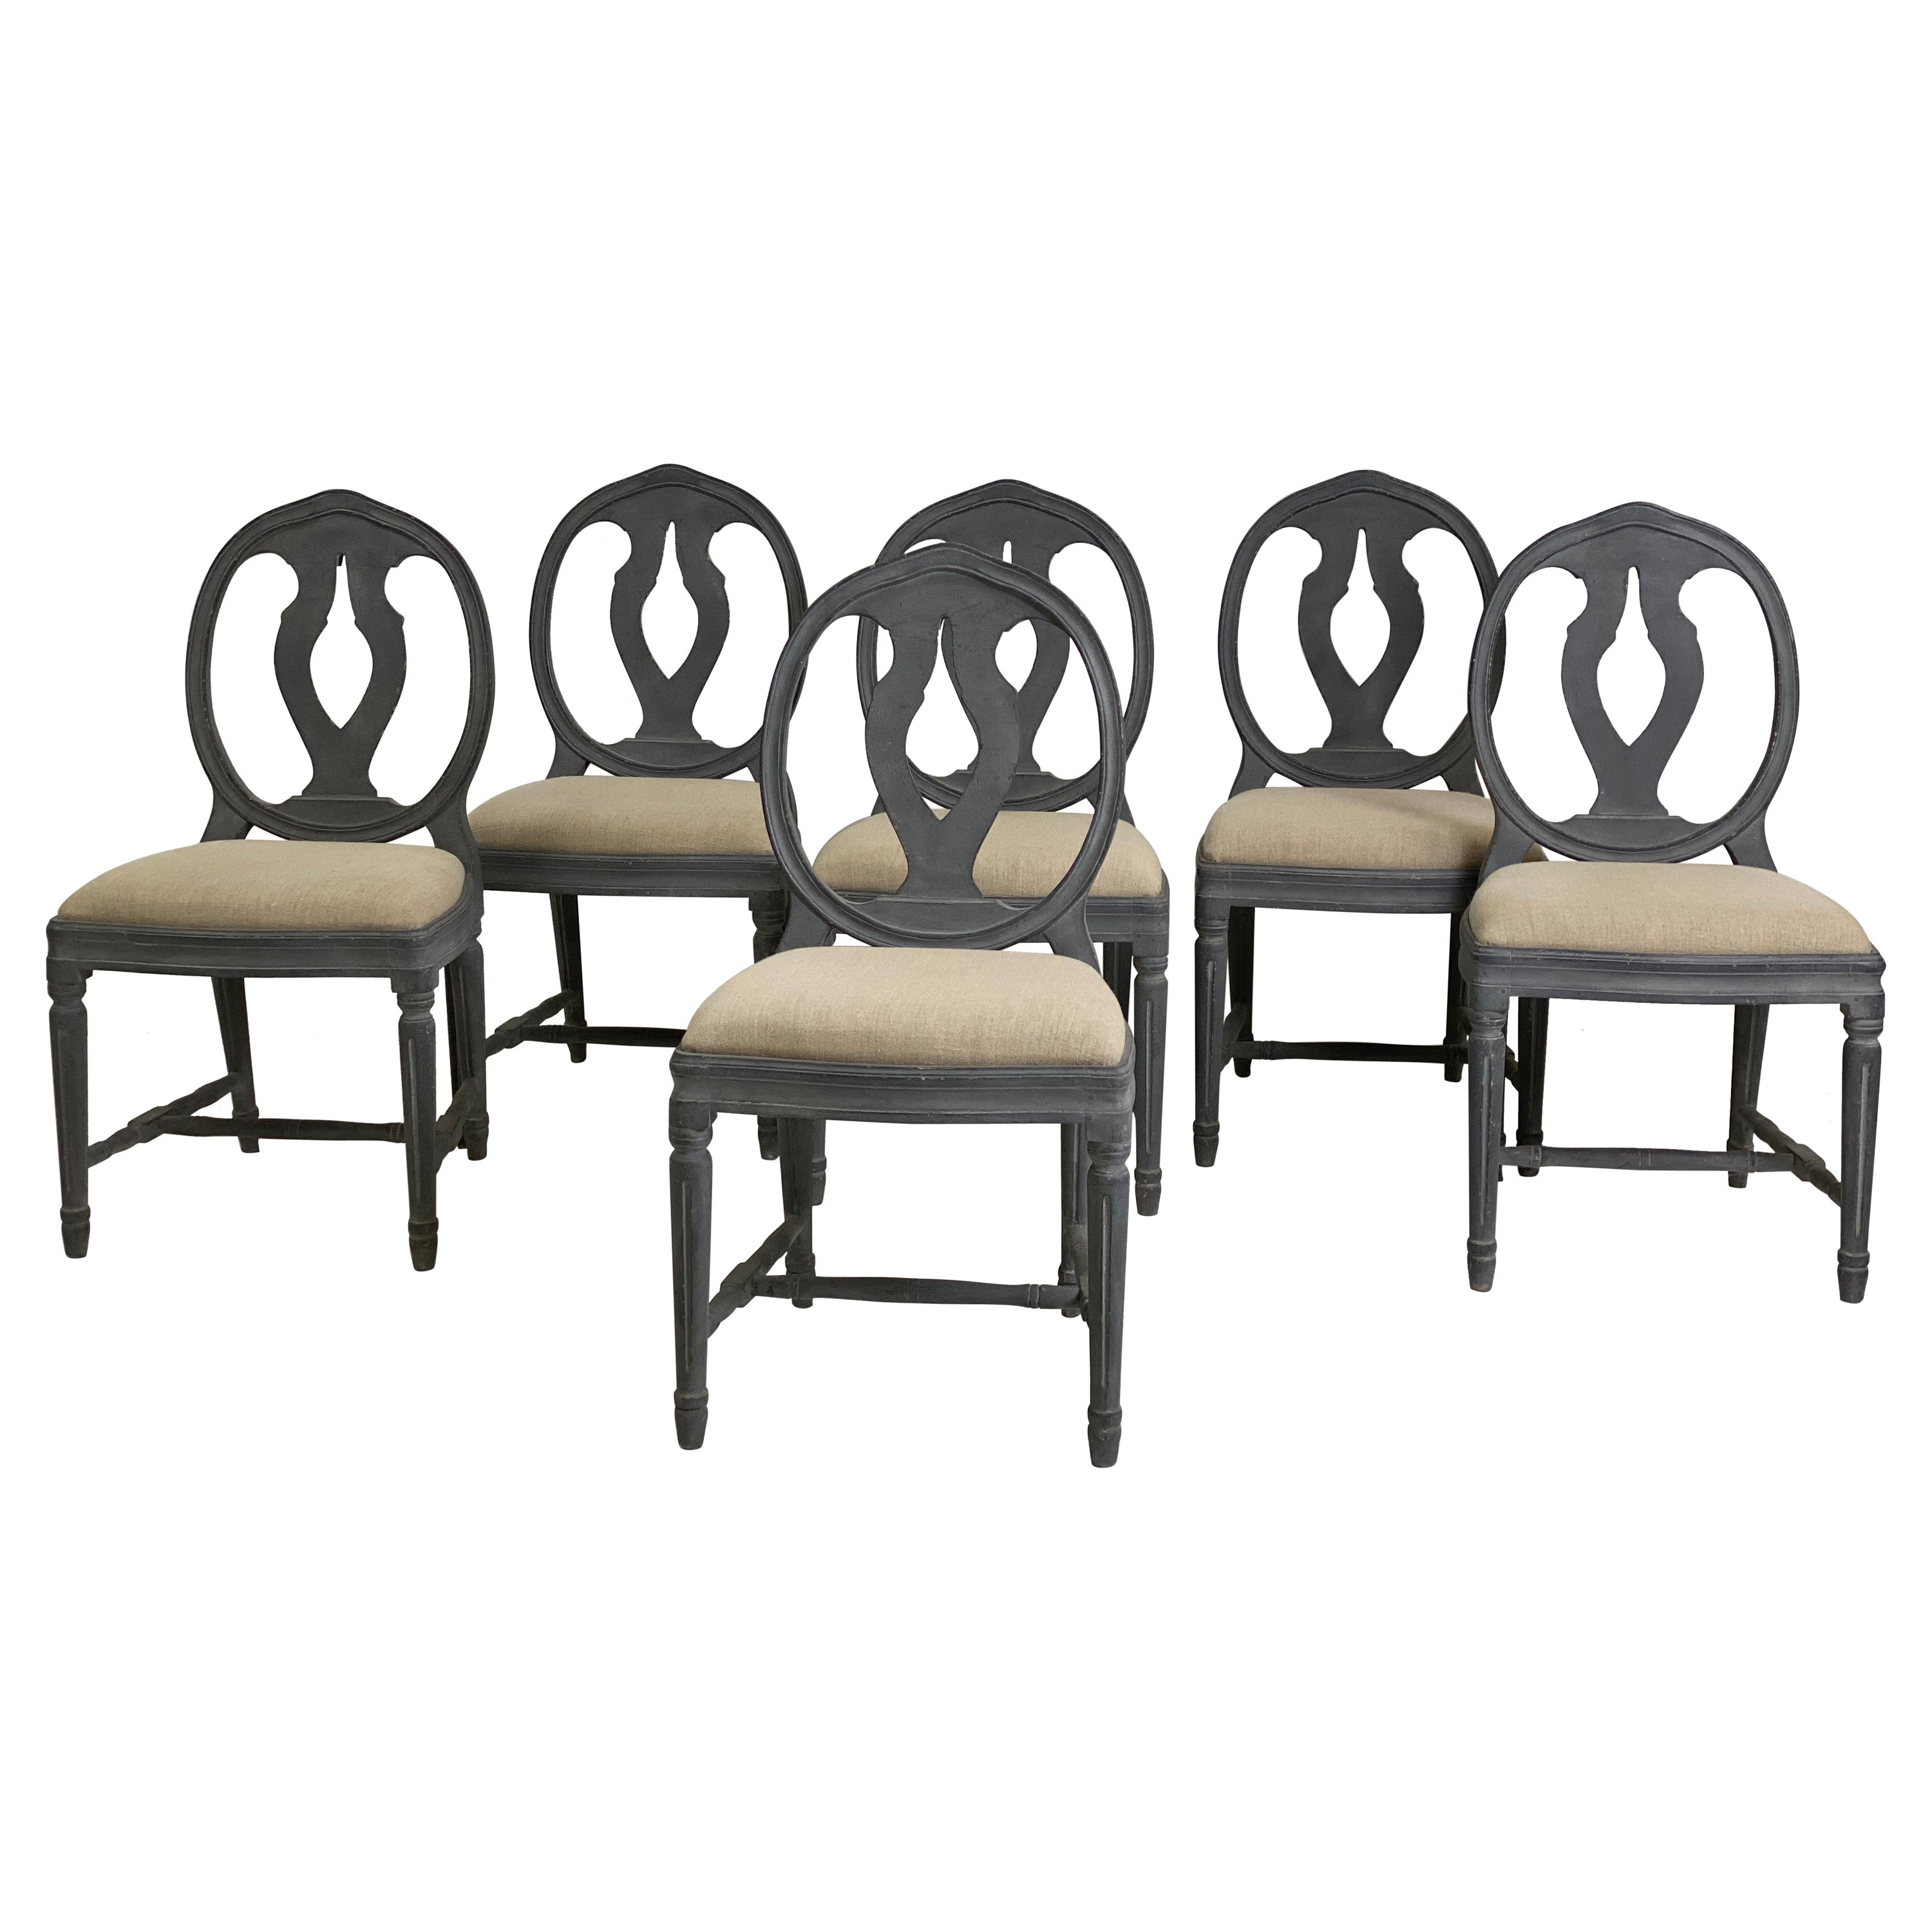 Set of 6 Patinated Swedish Chairs in a Blue/Grey Color, Gustavian Style